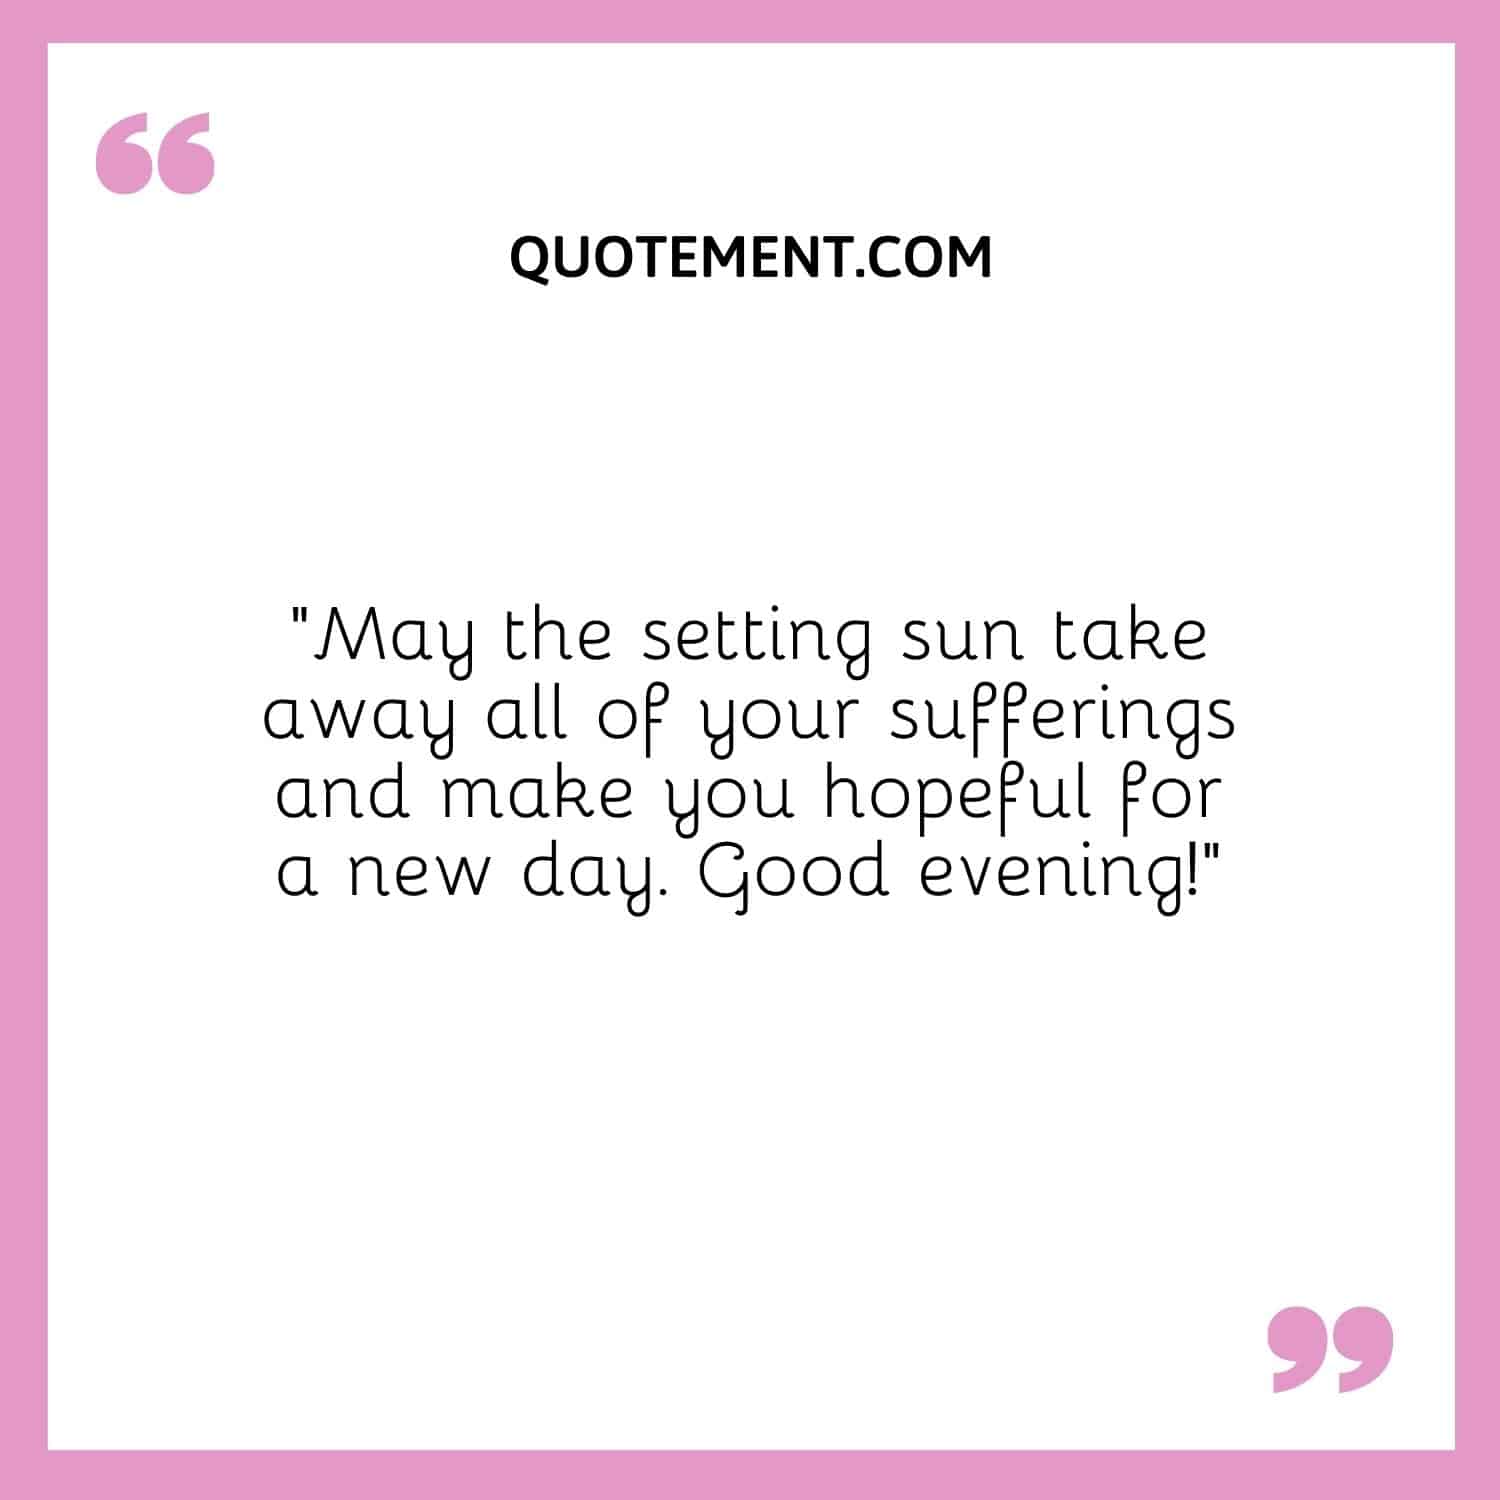 May the setting sun take away all of your sufferings